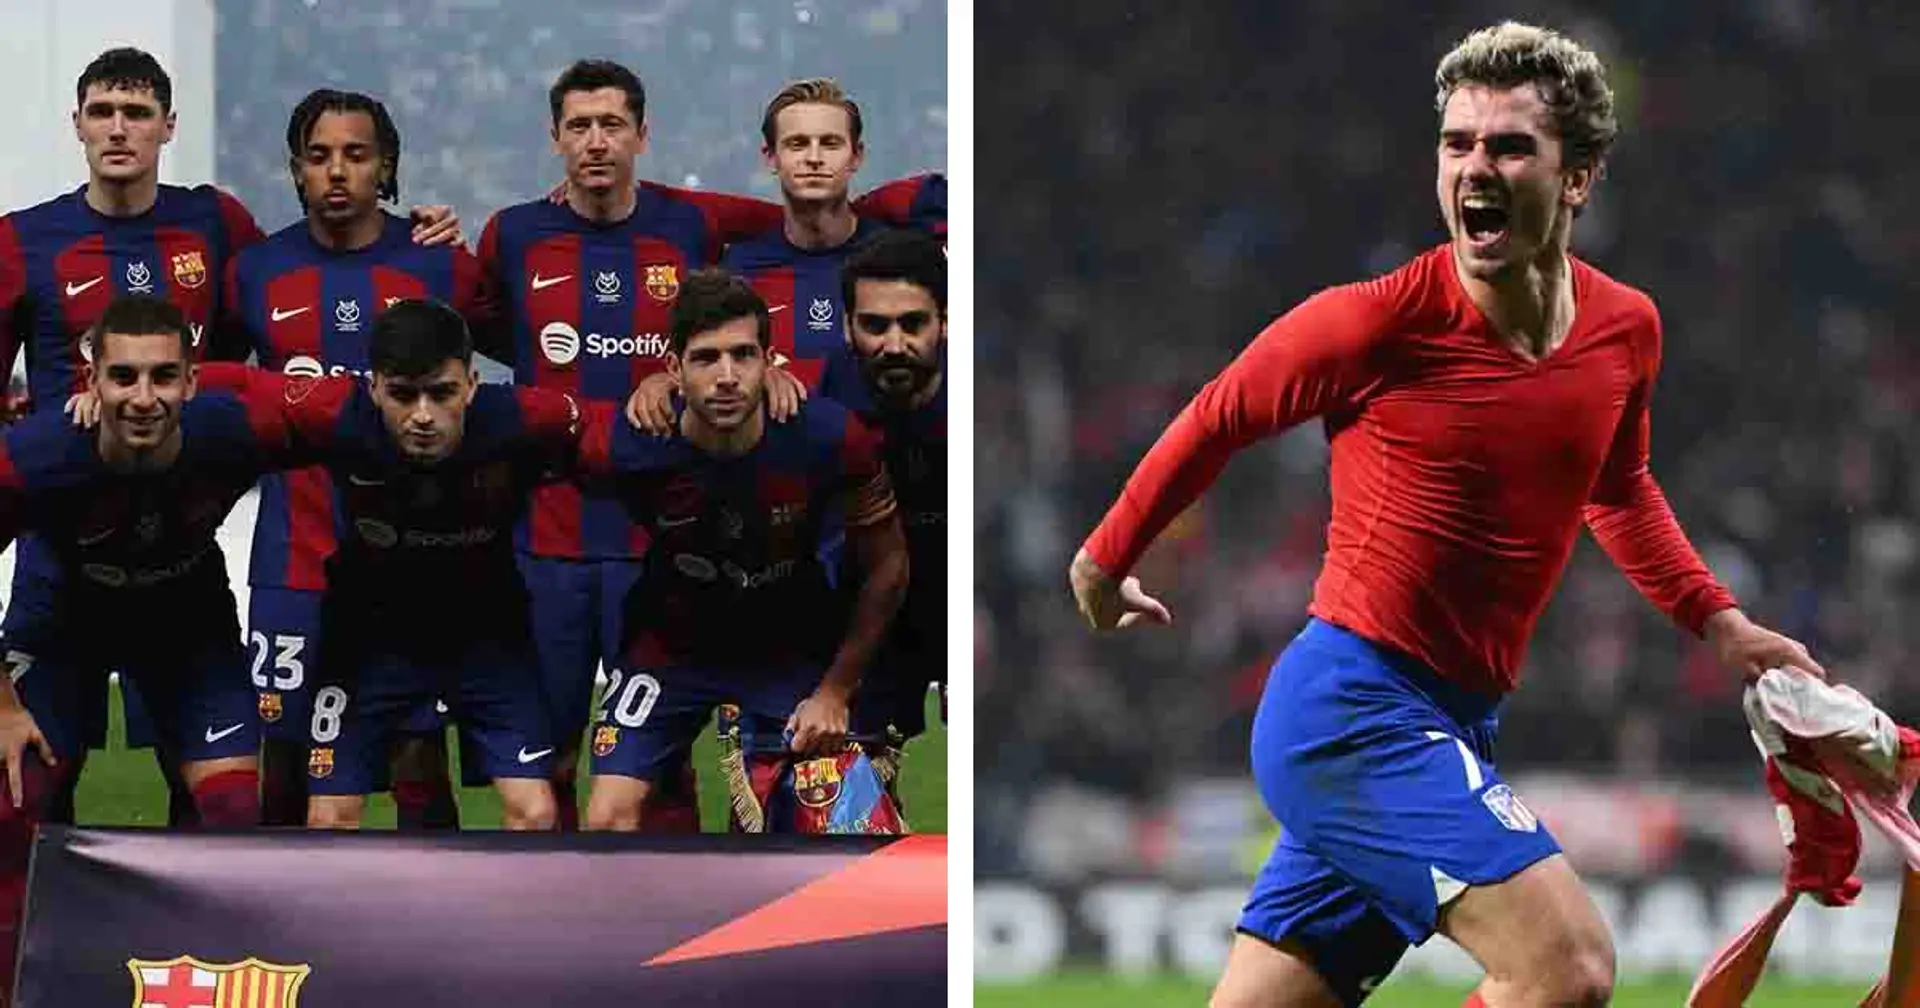 Revealed: how Barca squad reacted to Griezmann's stunning strike to knock Real Madrid out of Copa del Rey